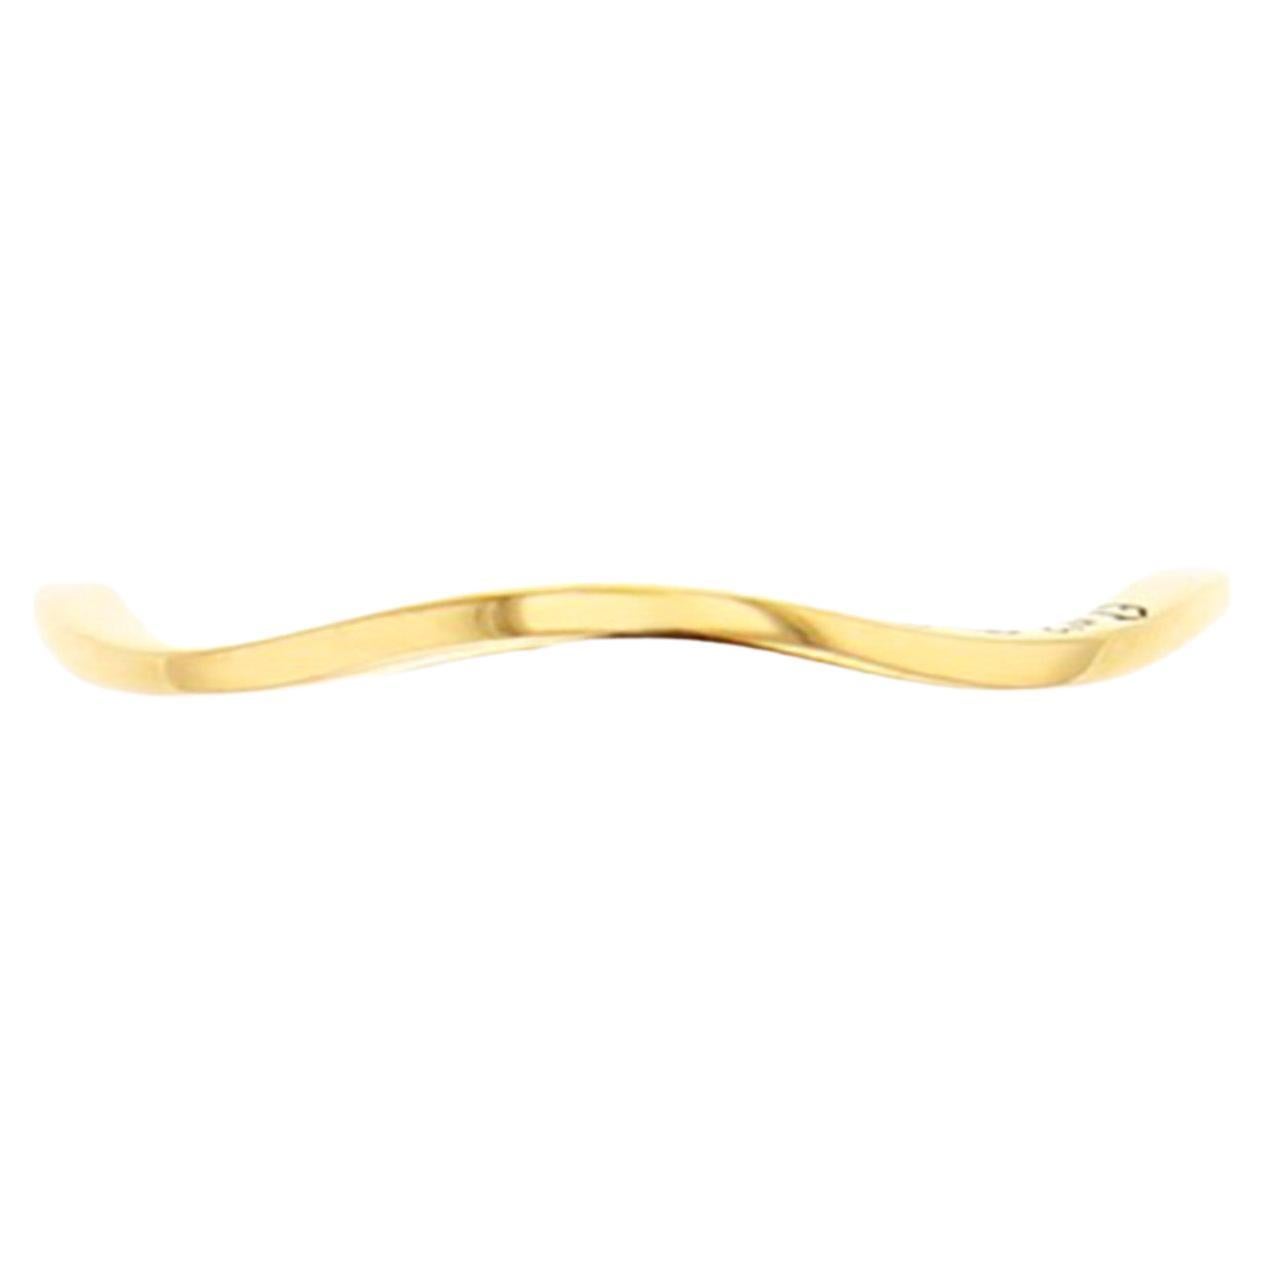 Stylet Ring in 18k Yellow Gold by Elie Top